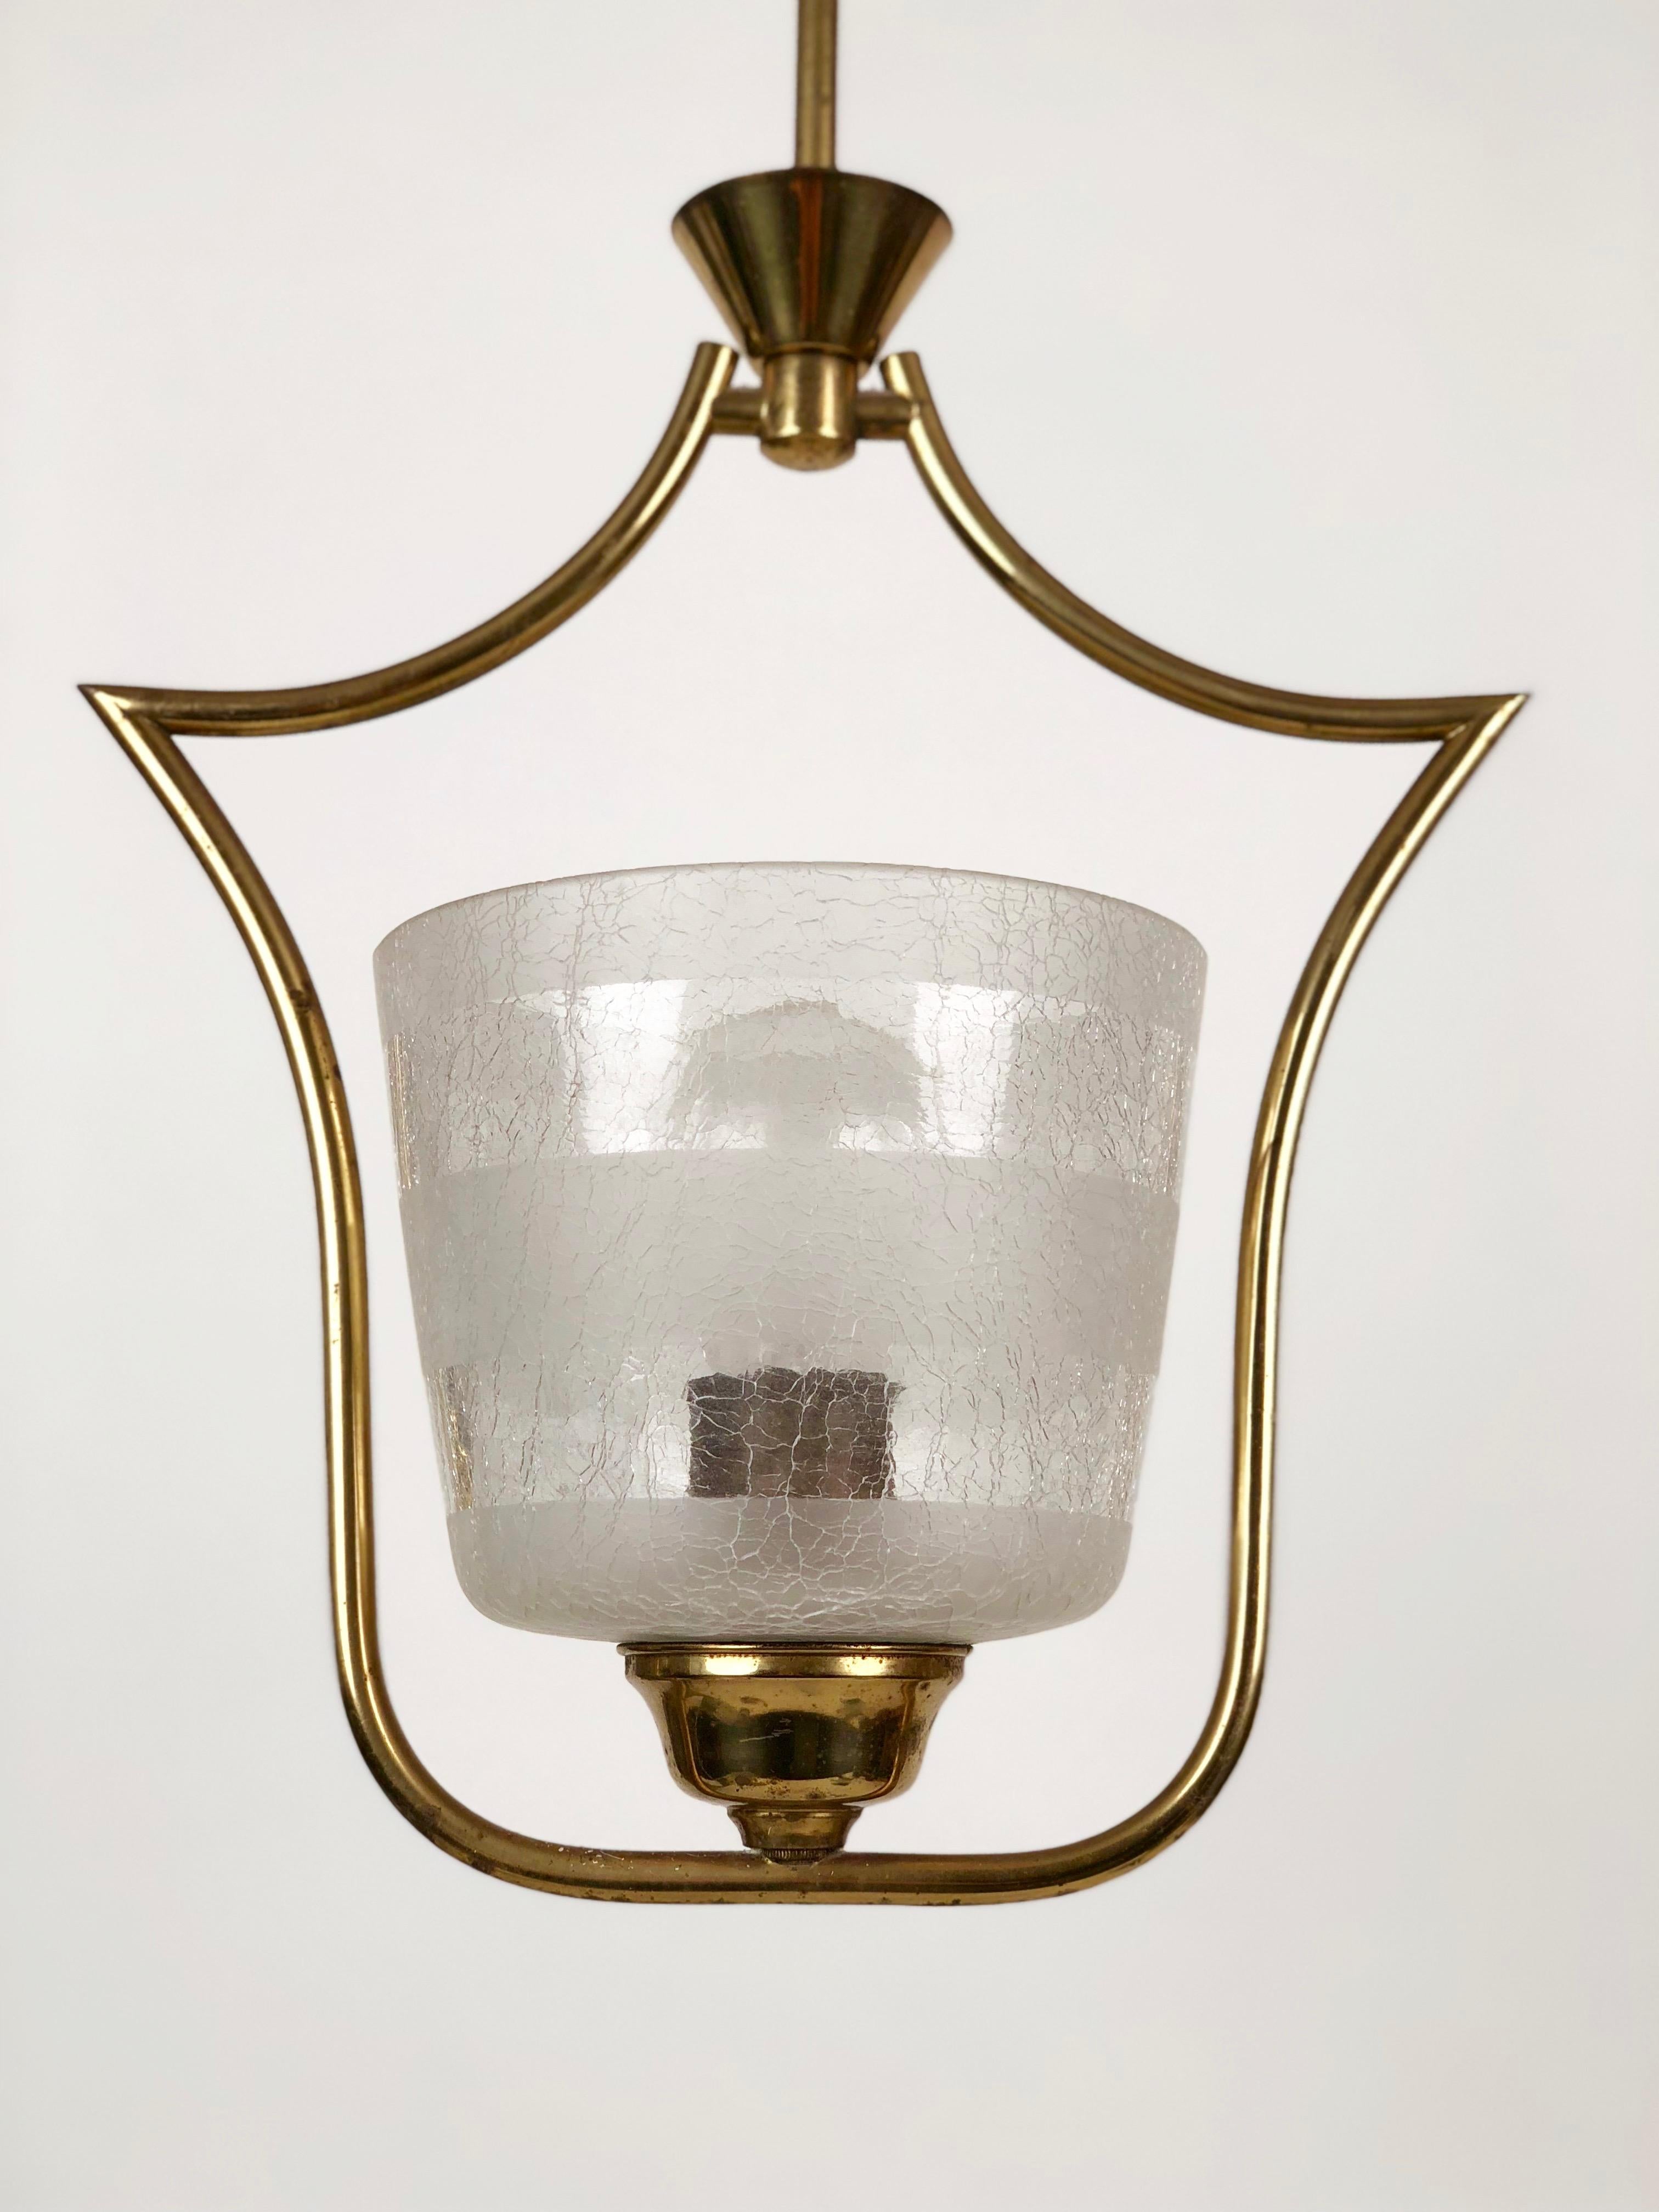 20th Century Hollywood Regency Styled Pendant Lamp in Brass and Glass, from Austria, 1950s For Sale